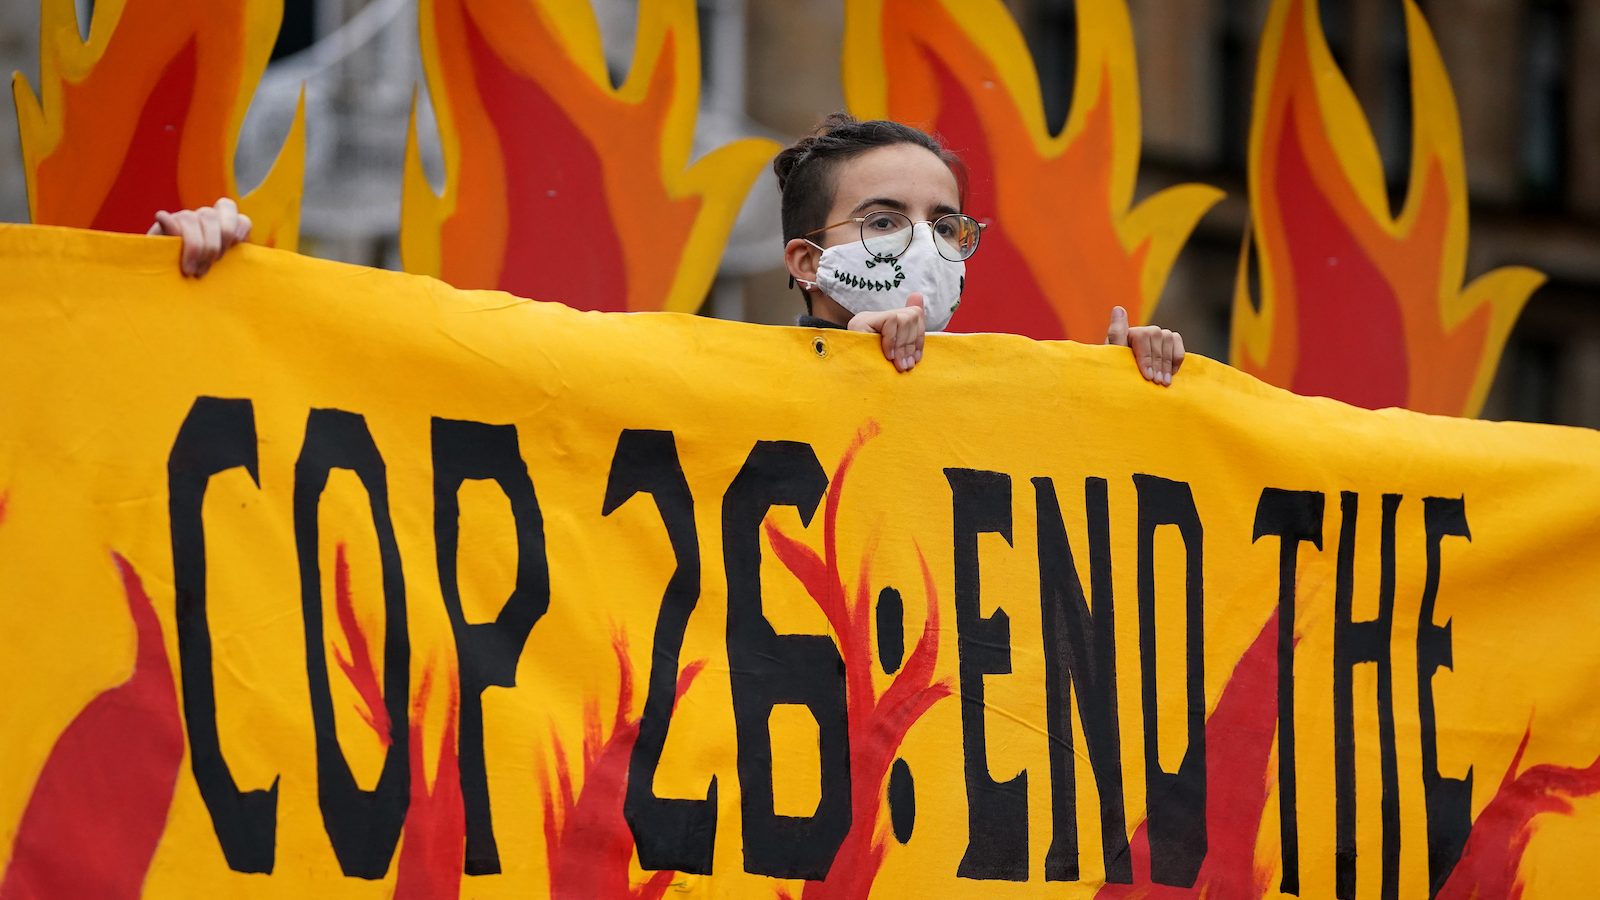 A climate protester holds a sign with orange flames at COP26.